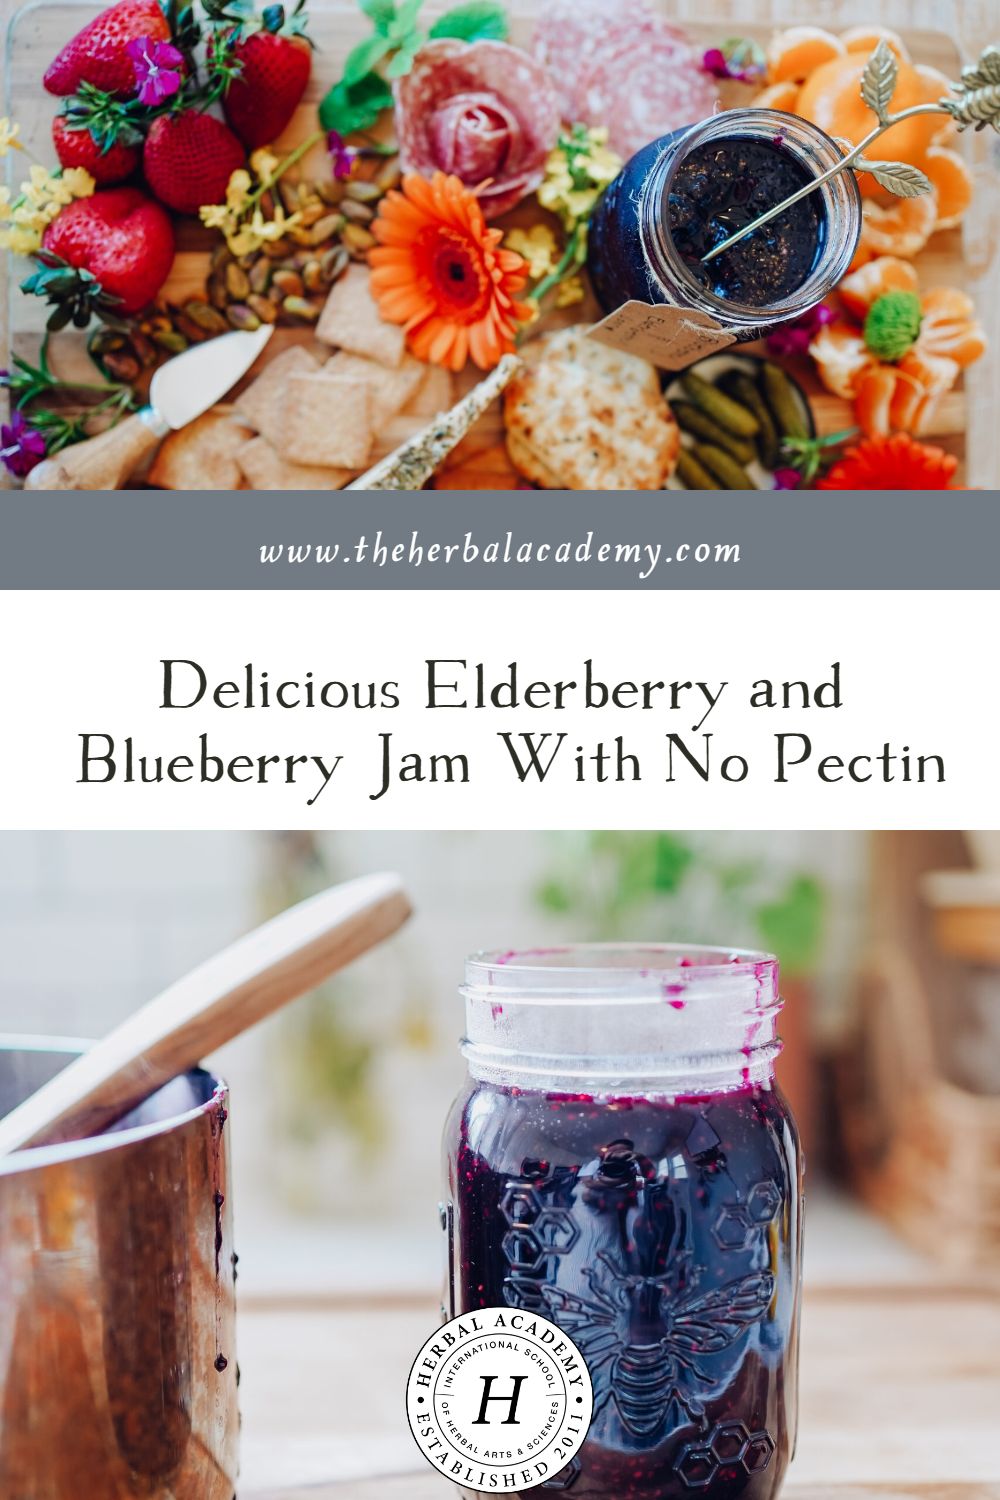 Delicious Elderberry and Blueberry Jam With No Pectin | Herbal Academy | As a delicious superfood, elderberry and blueberry jam is a great herbal recipe to try. This jam recipe is super easy and needs no pectin!